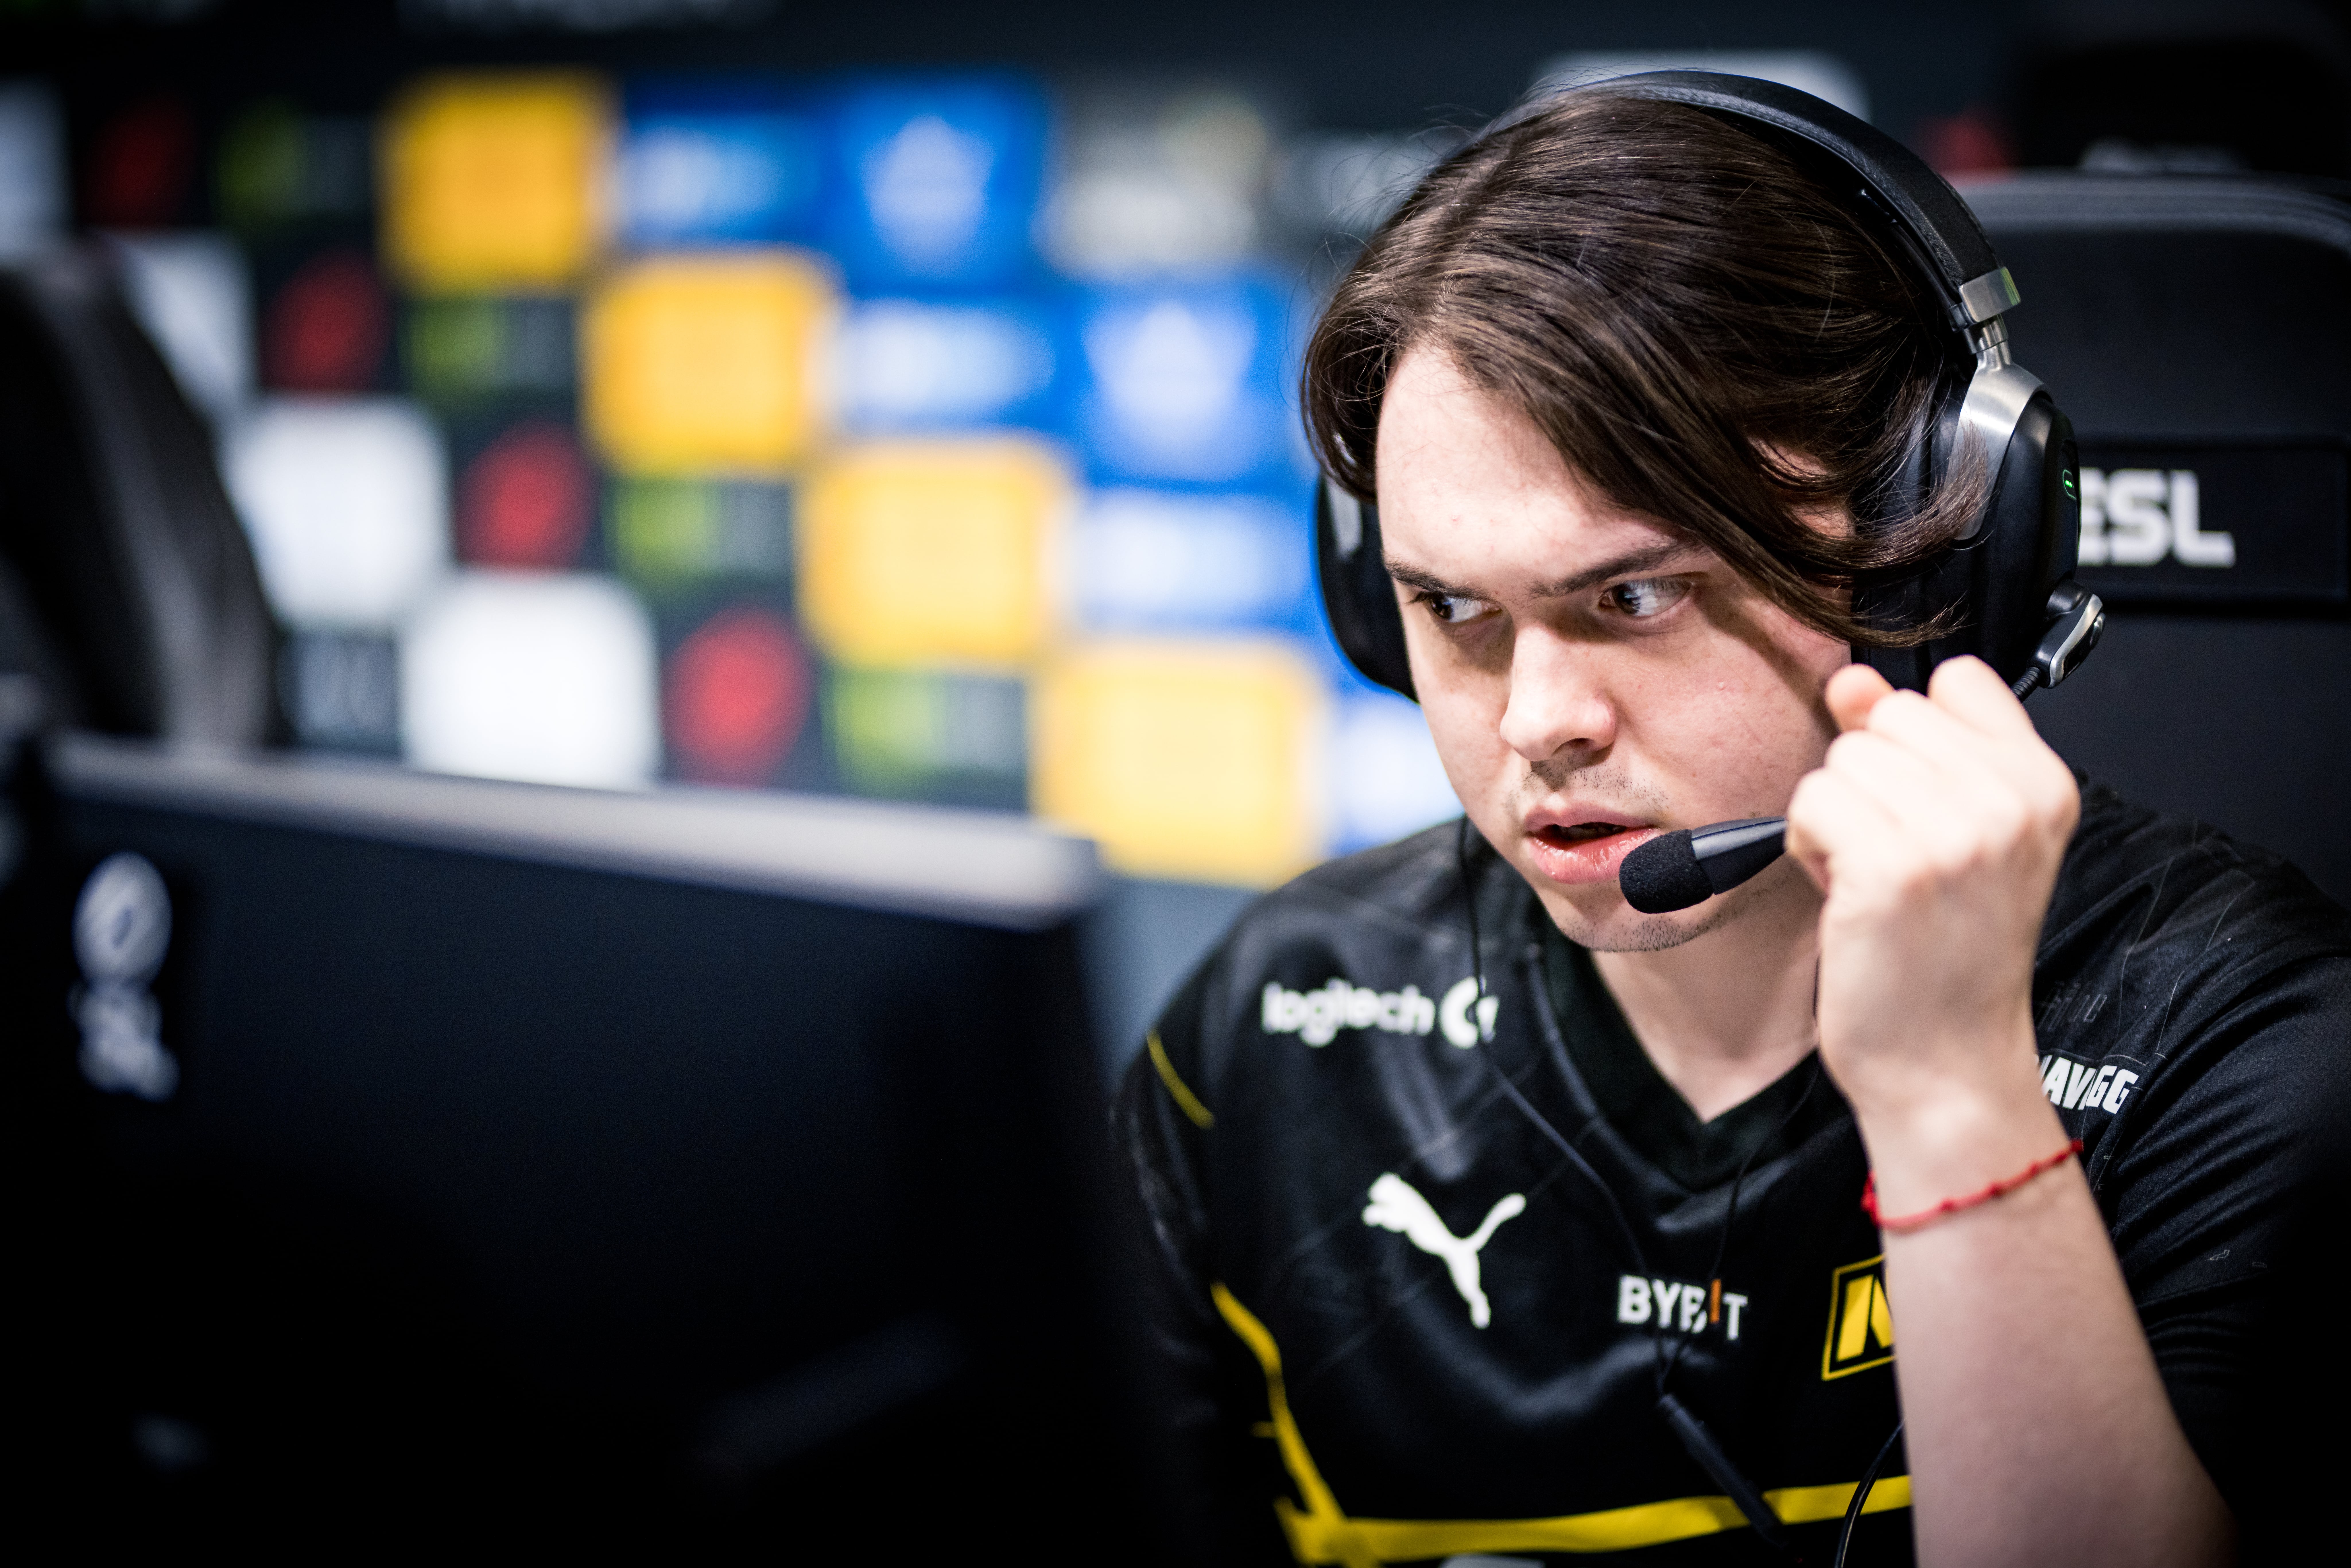 s1mple - 2nd Best Player In The World - HLTV.org's #2 Of 2019 (CS:GO) 